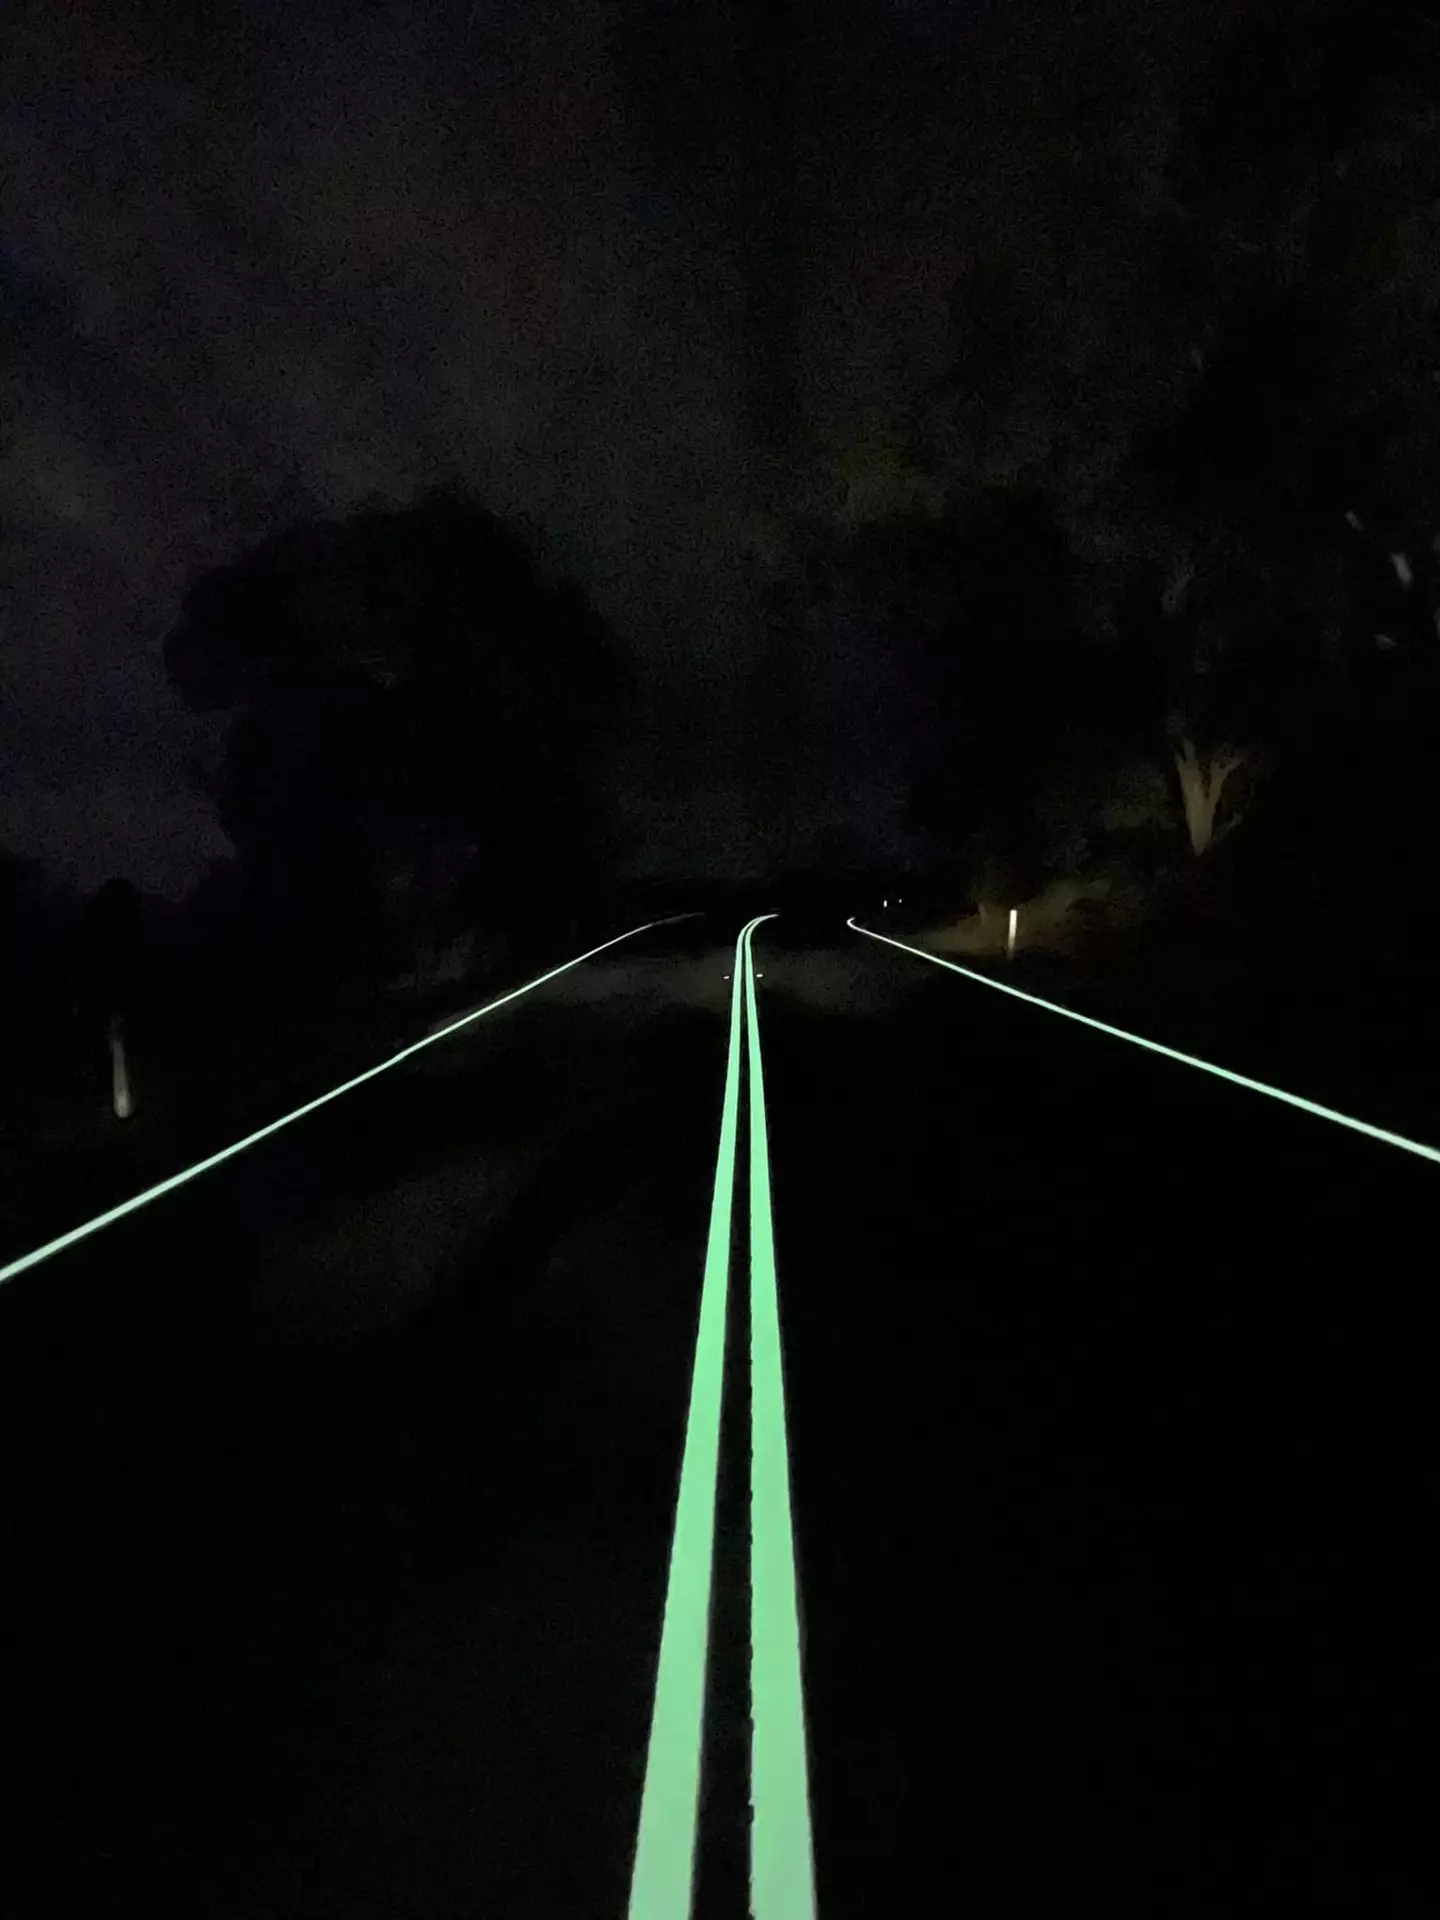 The lines light up at night to help drivers.